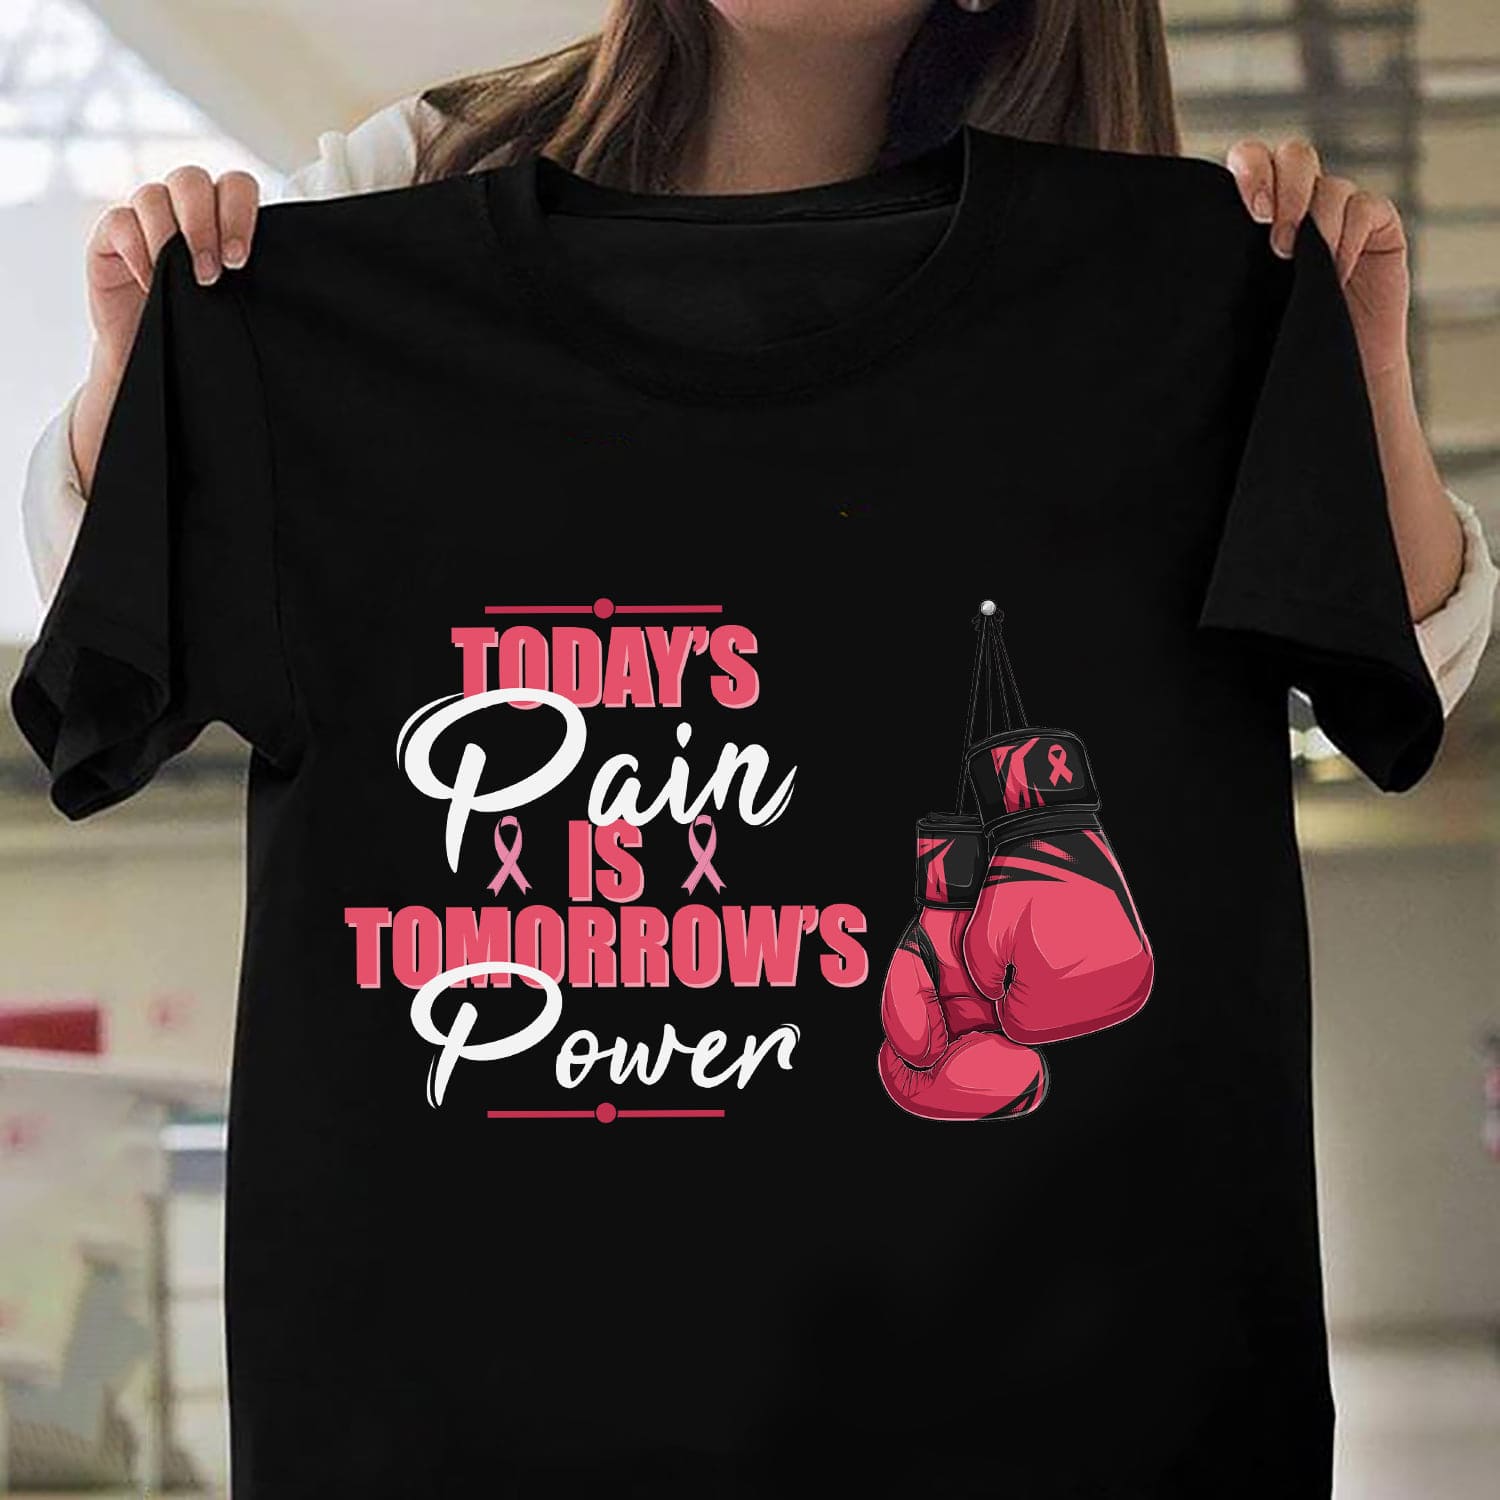 Today's pain is tomorrow's power - Breast cancer awareness, Boxing glove